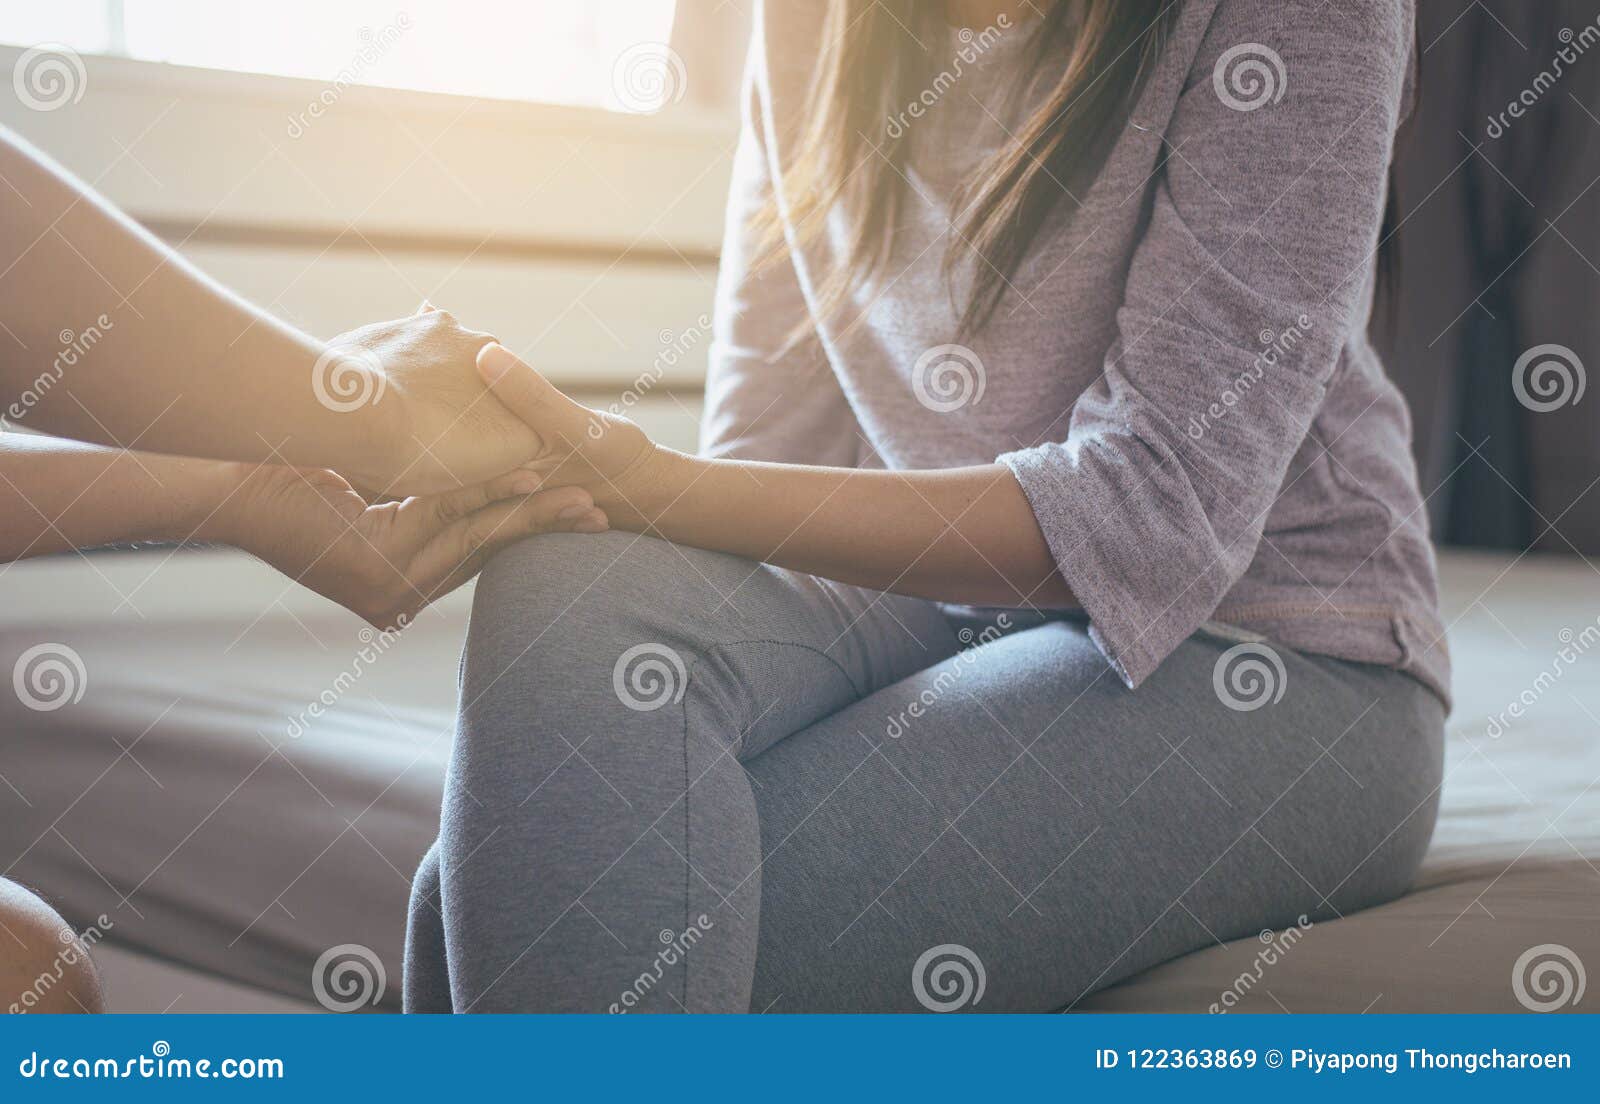 man giving hand to depressed woman patient,personal development including life coaching therapy sessions and speech therapy,mental